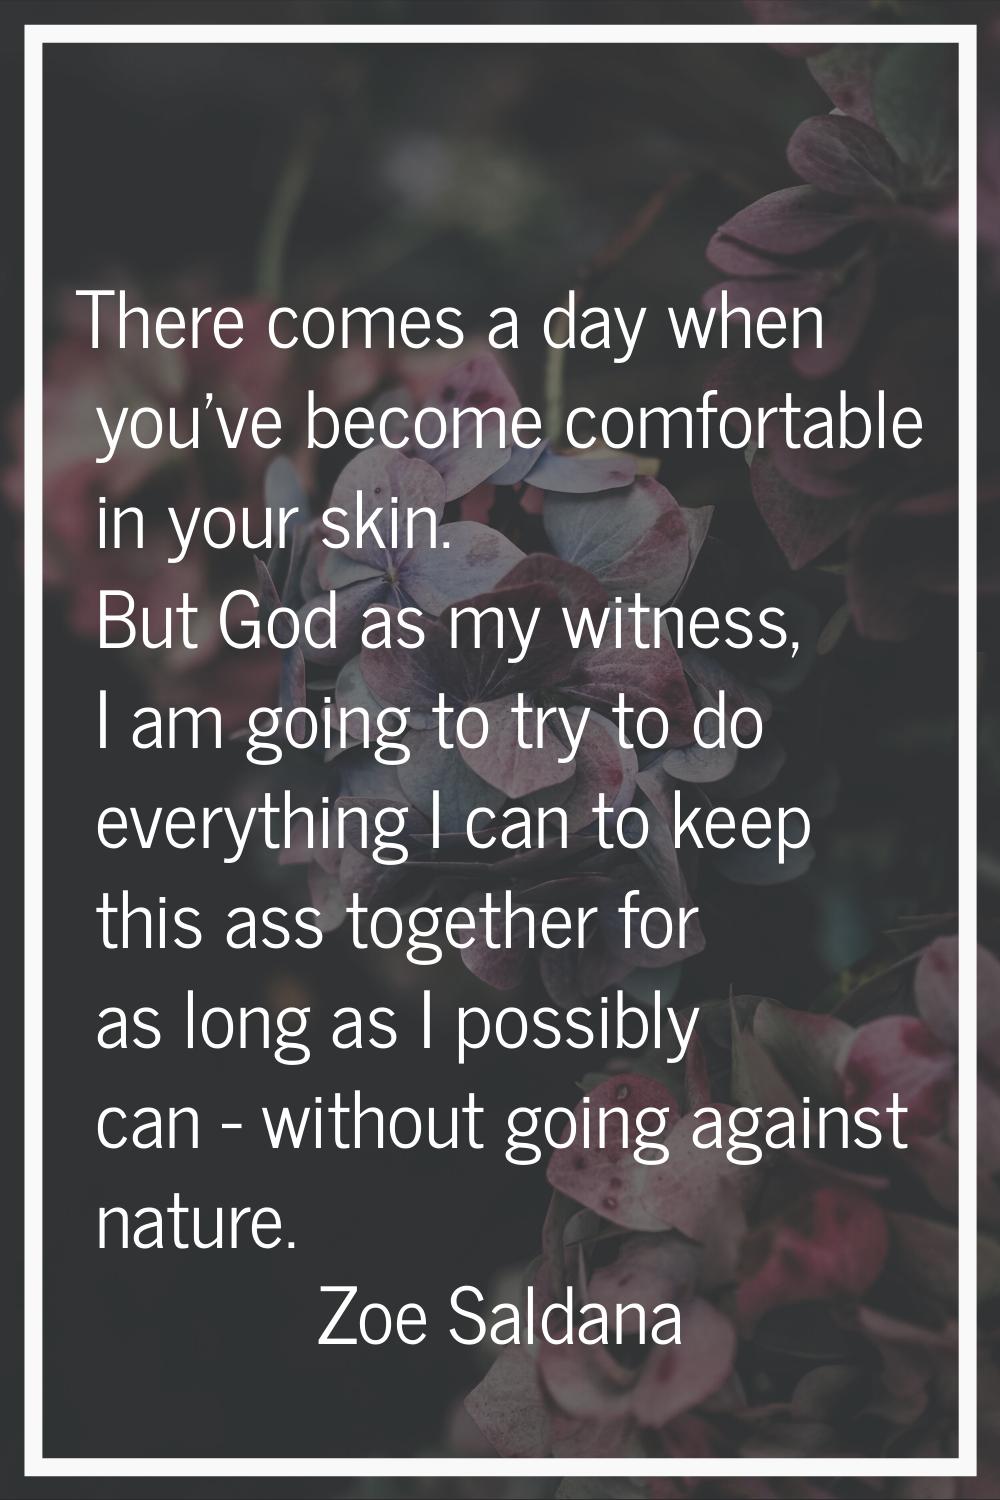 There comes a day when you've become comfortable in your skin. But God as my witness, I am going to